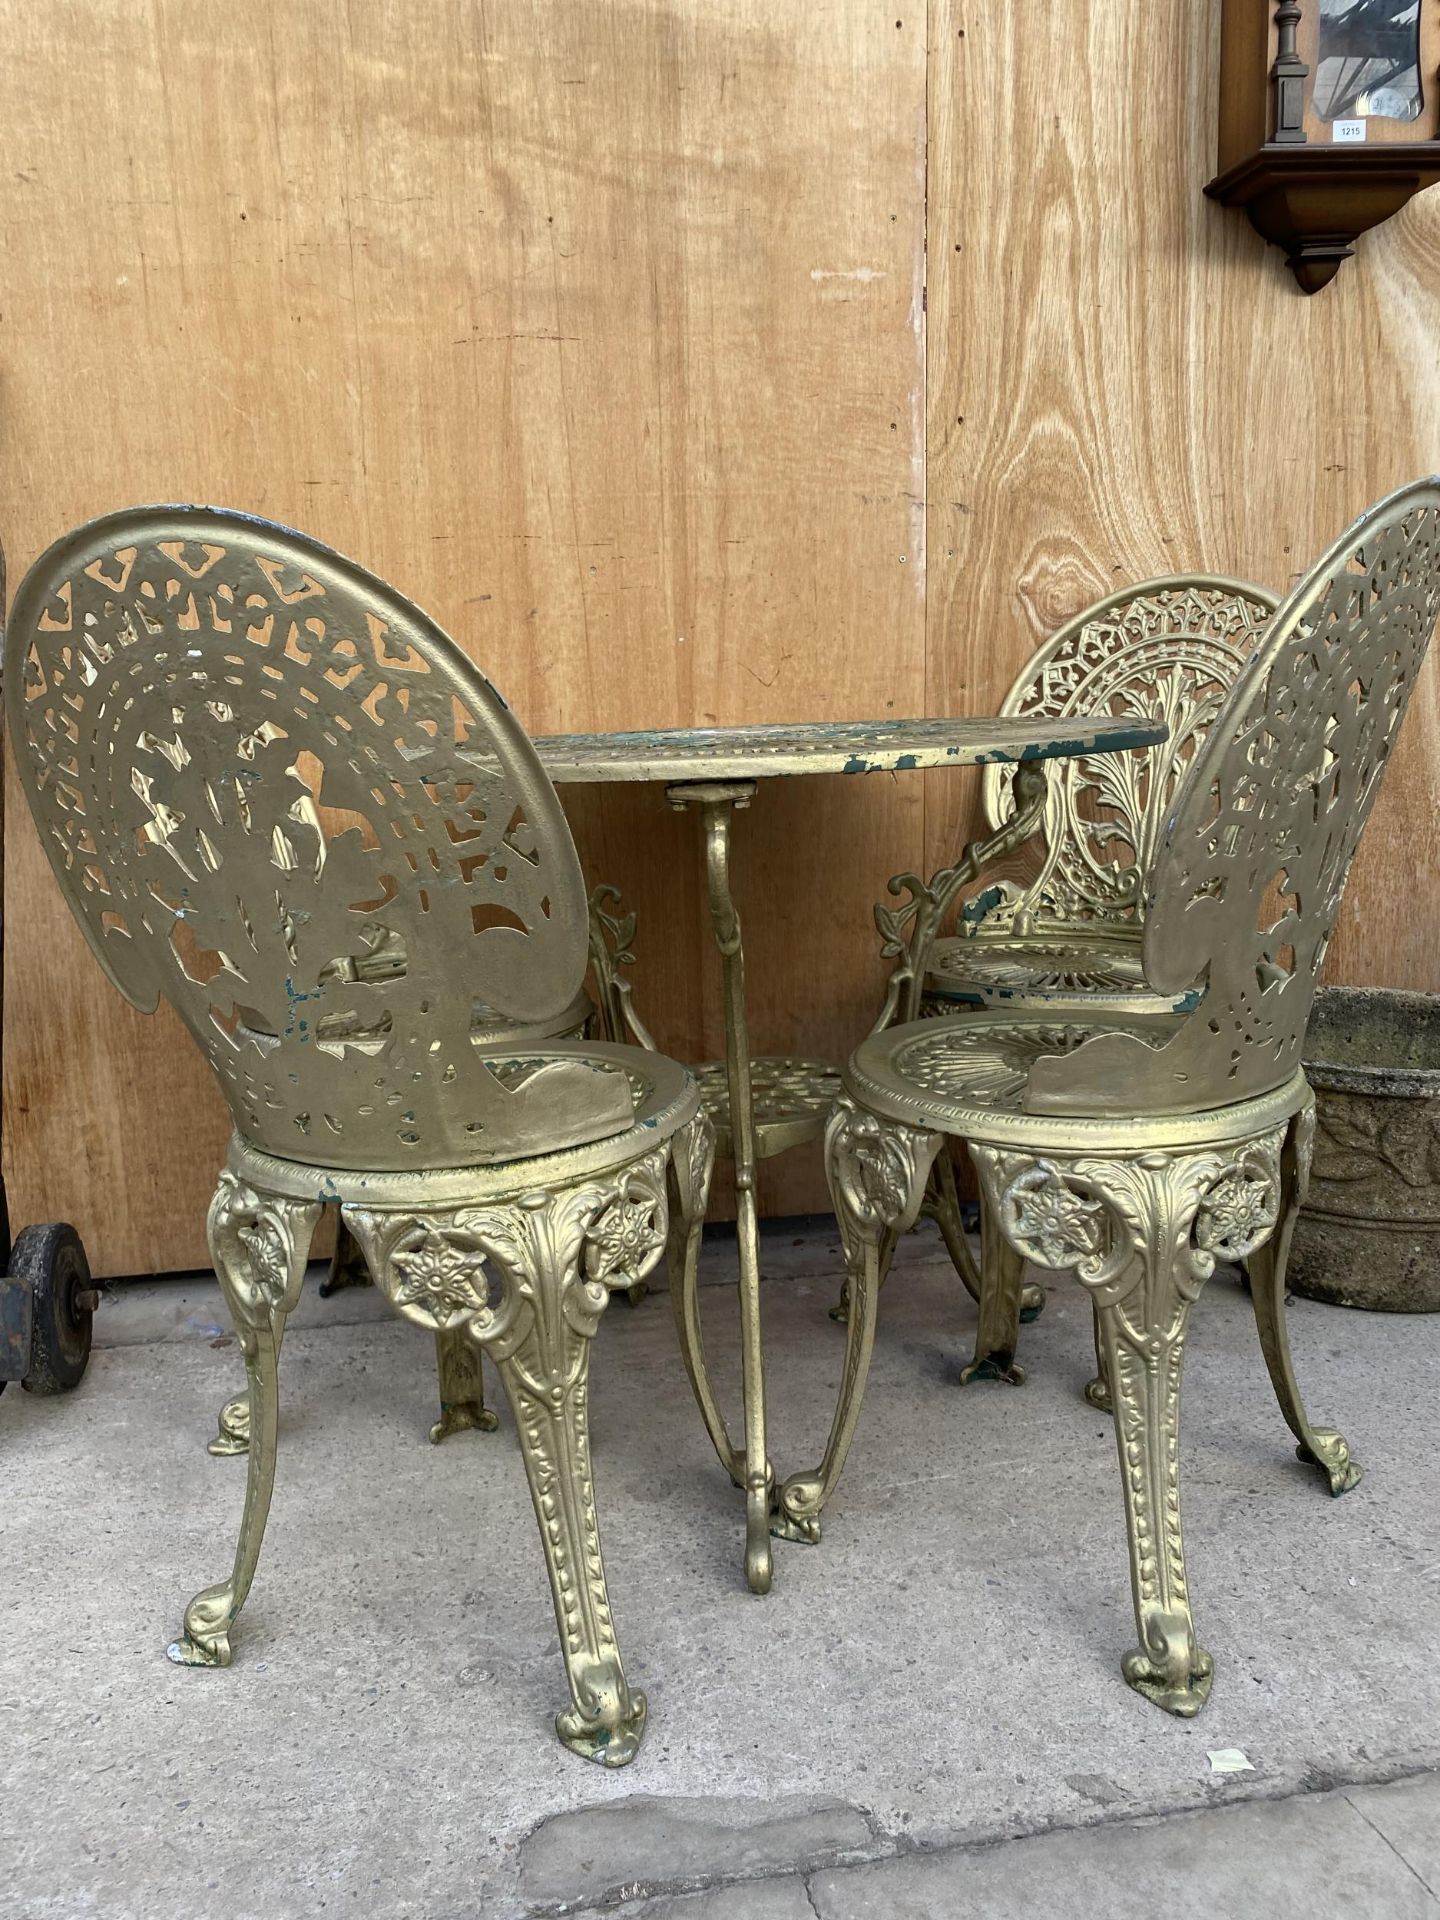 A VINTAGE STYLE CAST ALLOY BISTRO SET COMPRISING OF A ROUND TABLE AND FOUR CHAIRS - Image 2 of 4